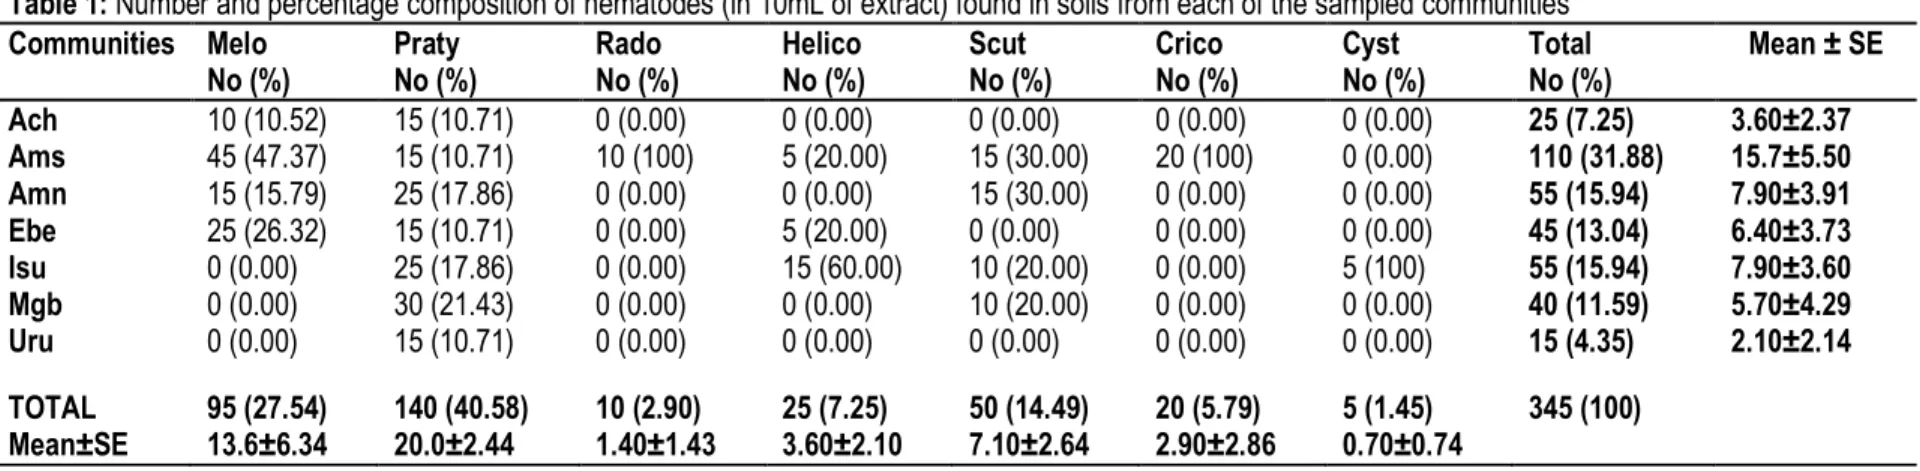 Table 1: Number and percentage composition of nematodes (in 10mL of extract) found in soils from each of the sampled communities   Communities  Melo  No (%)  Praty  No (%)  Rado  No (%)  Helico  No (%)  Scut  No (%)  Crico  No (%)  Cyst  No (%)  Total  No 